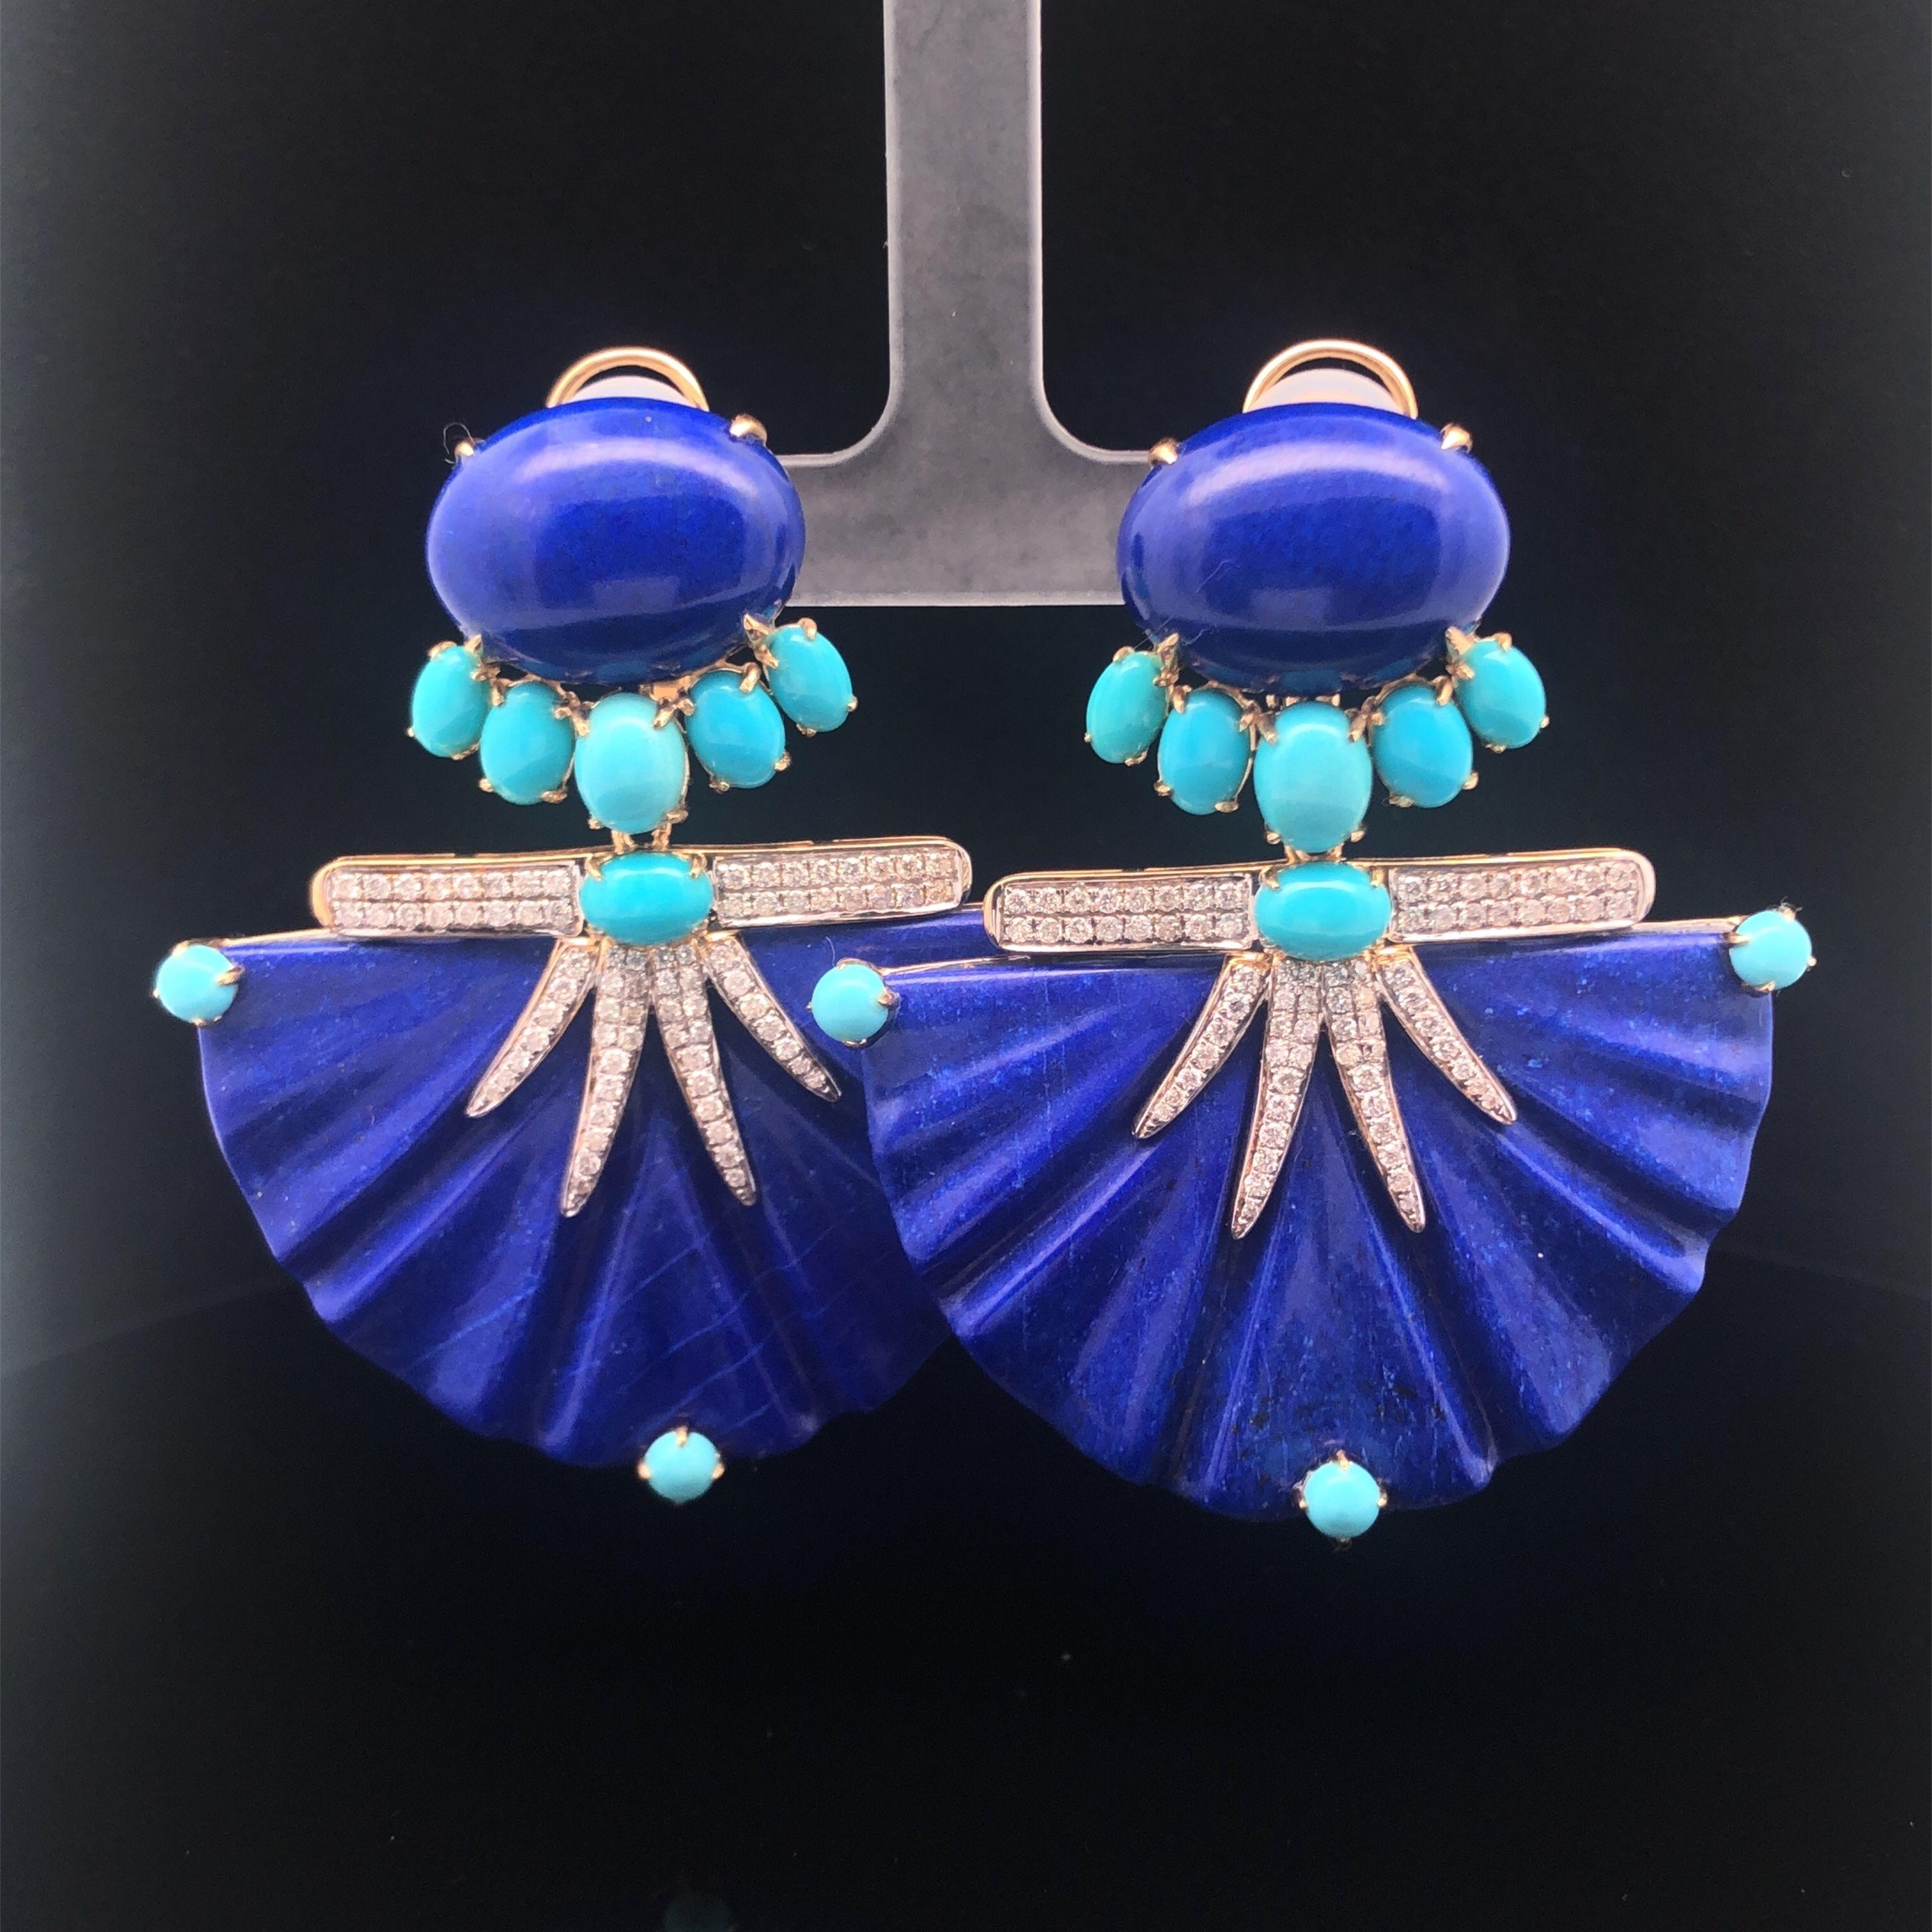 18KYG Earrings With Ribbed Lapis, Cabochon Turquoise And Diamond Earrings For Sale 4